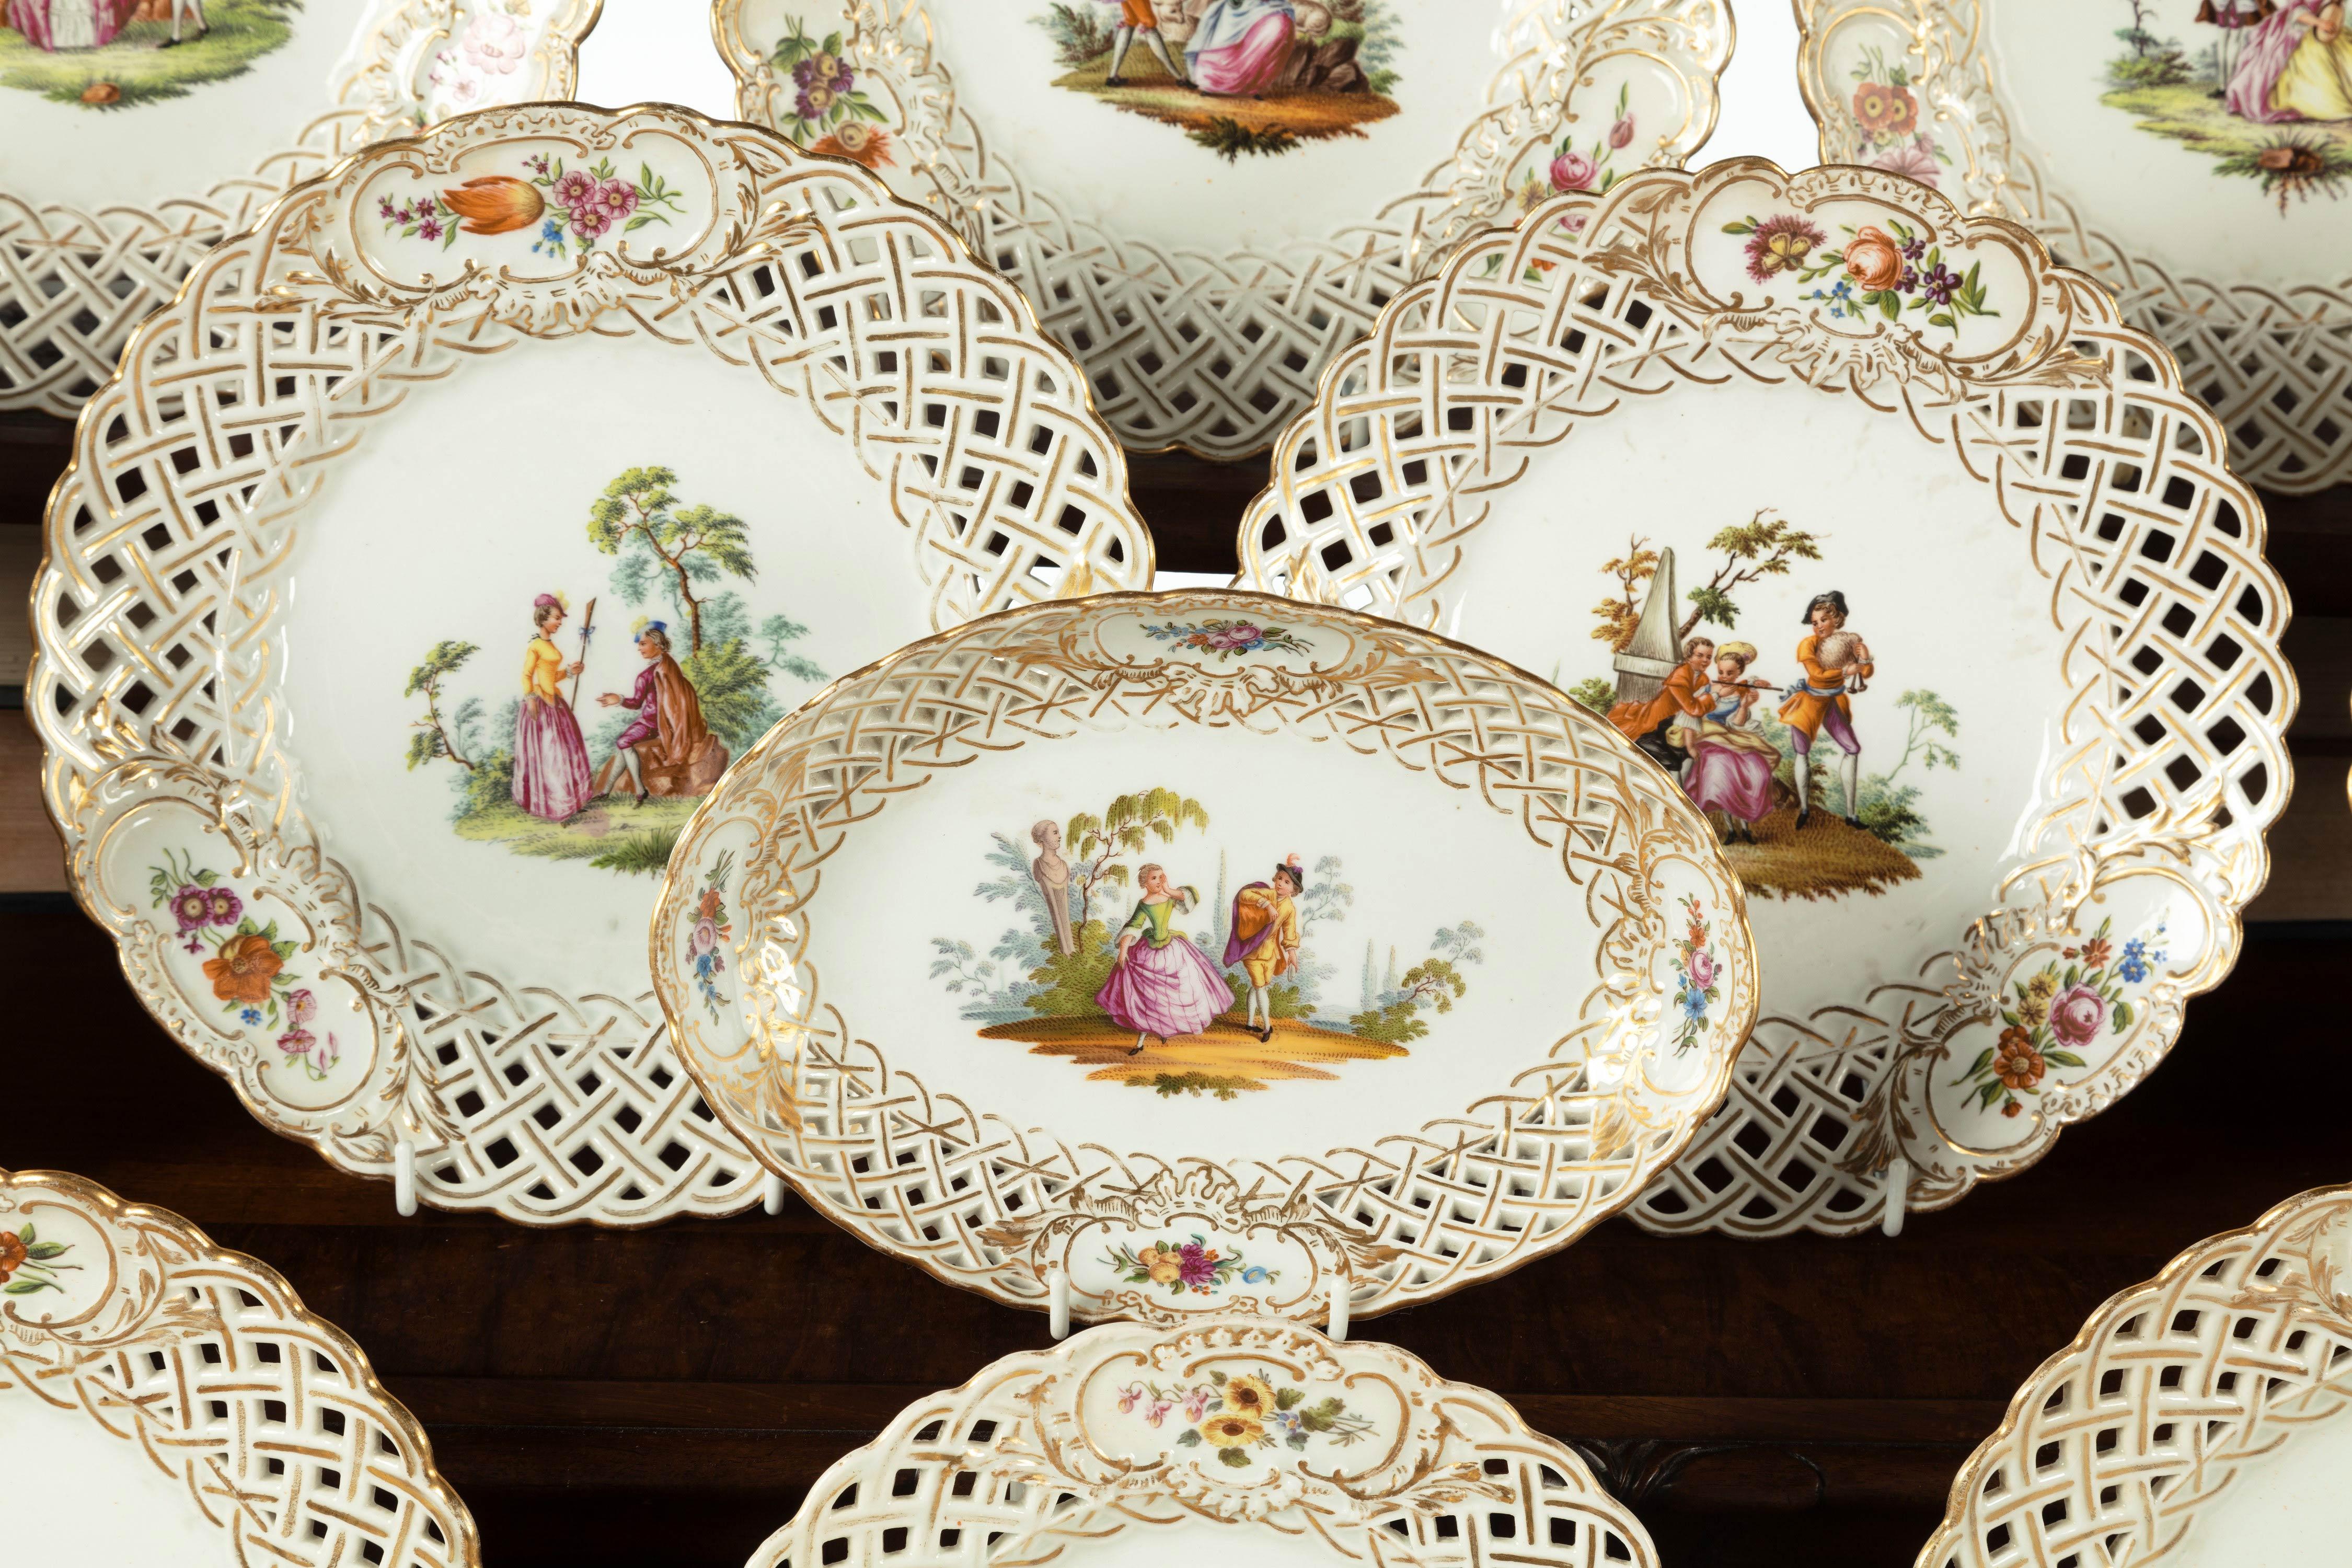 A good late 19th century Meissen porcelain dessert service with pierced, reticulated borders. The central panels of Wyattesque in design. Comprising 26 pieces:

Measures: 16 plates= 9.5 inches
8 plates= 8.5 inches
2 dessert plates= 9 inches.
 